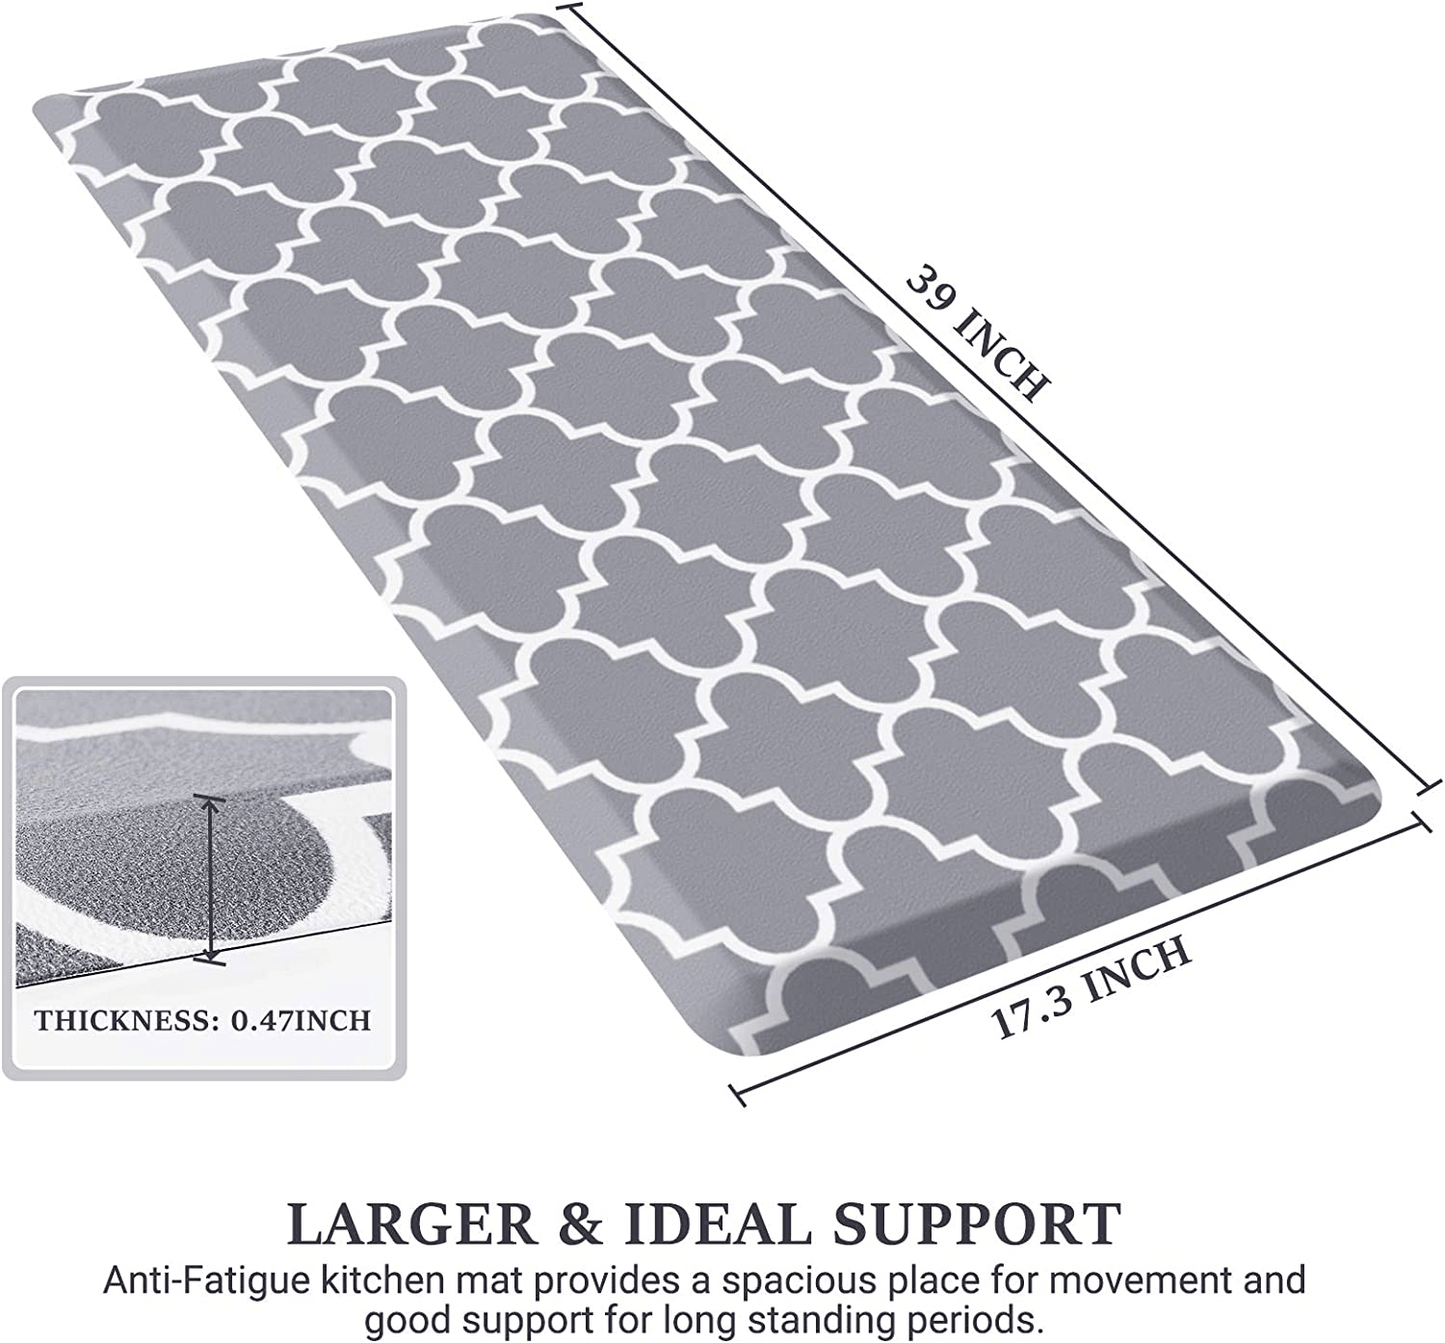 https://kol.pet/cdn/shop/products/wiselife-kitchen-mat-cushioned-anti-fatigue-kitchen-rug-17-3-x-39-non-slip-waterproof-kitchen-mats-and-rugs-heavy-duty-pvc-ergonomic-comfort-mat-for-kitchen-floor-home-office-sink-lau_edbdcefe-fee9-44a0-a27a-12555886aed2_1445x.png?v=1675680313